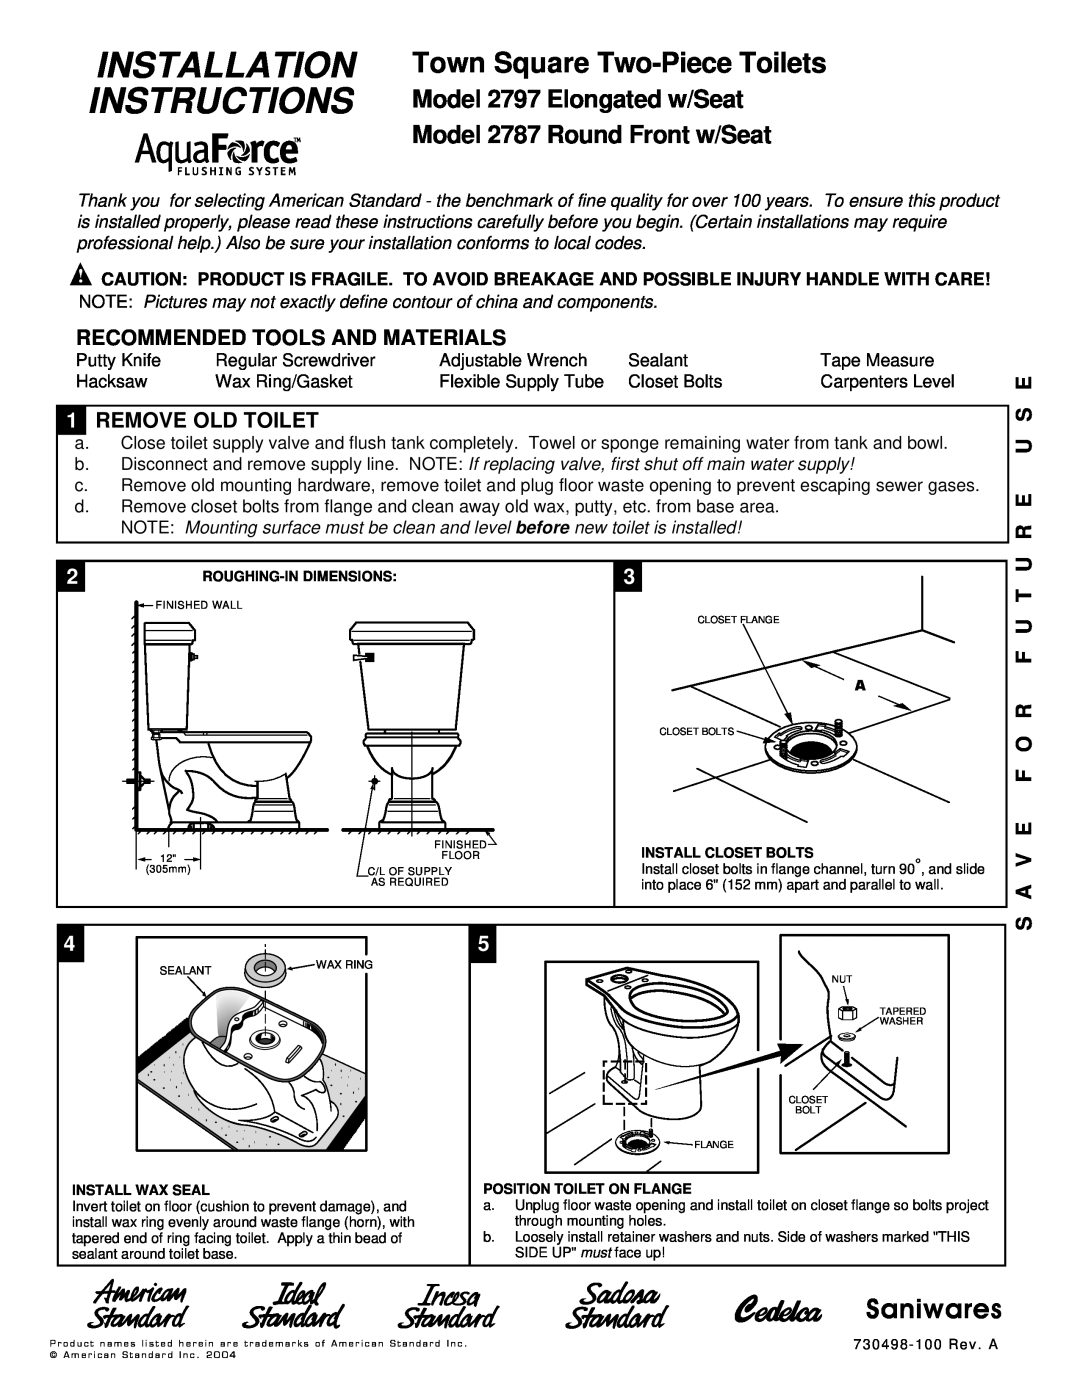 American Standard 2787 installation instructions Recommended Tools And Materials, 1REMOVE OLD TOILET, U R E U S E 